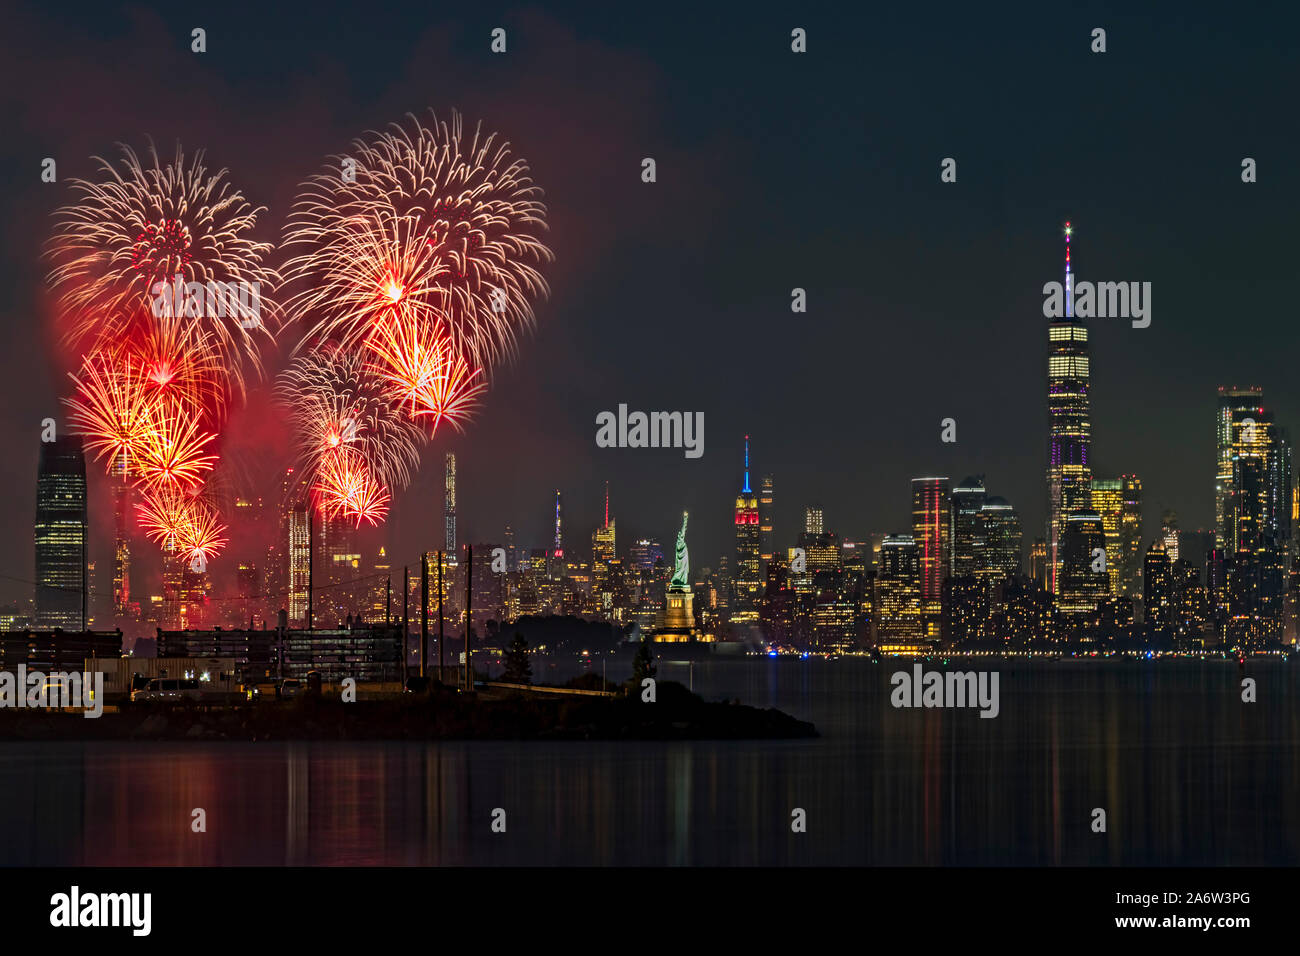 Fourth of July, Independence day fireworks display Stock Photo